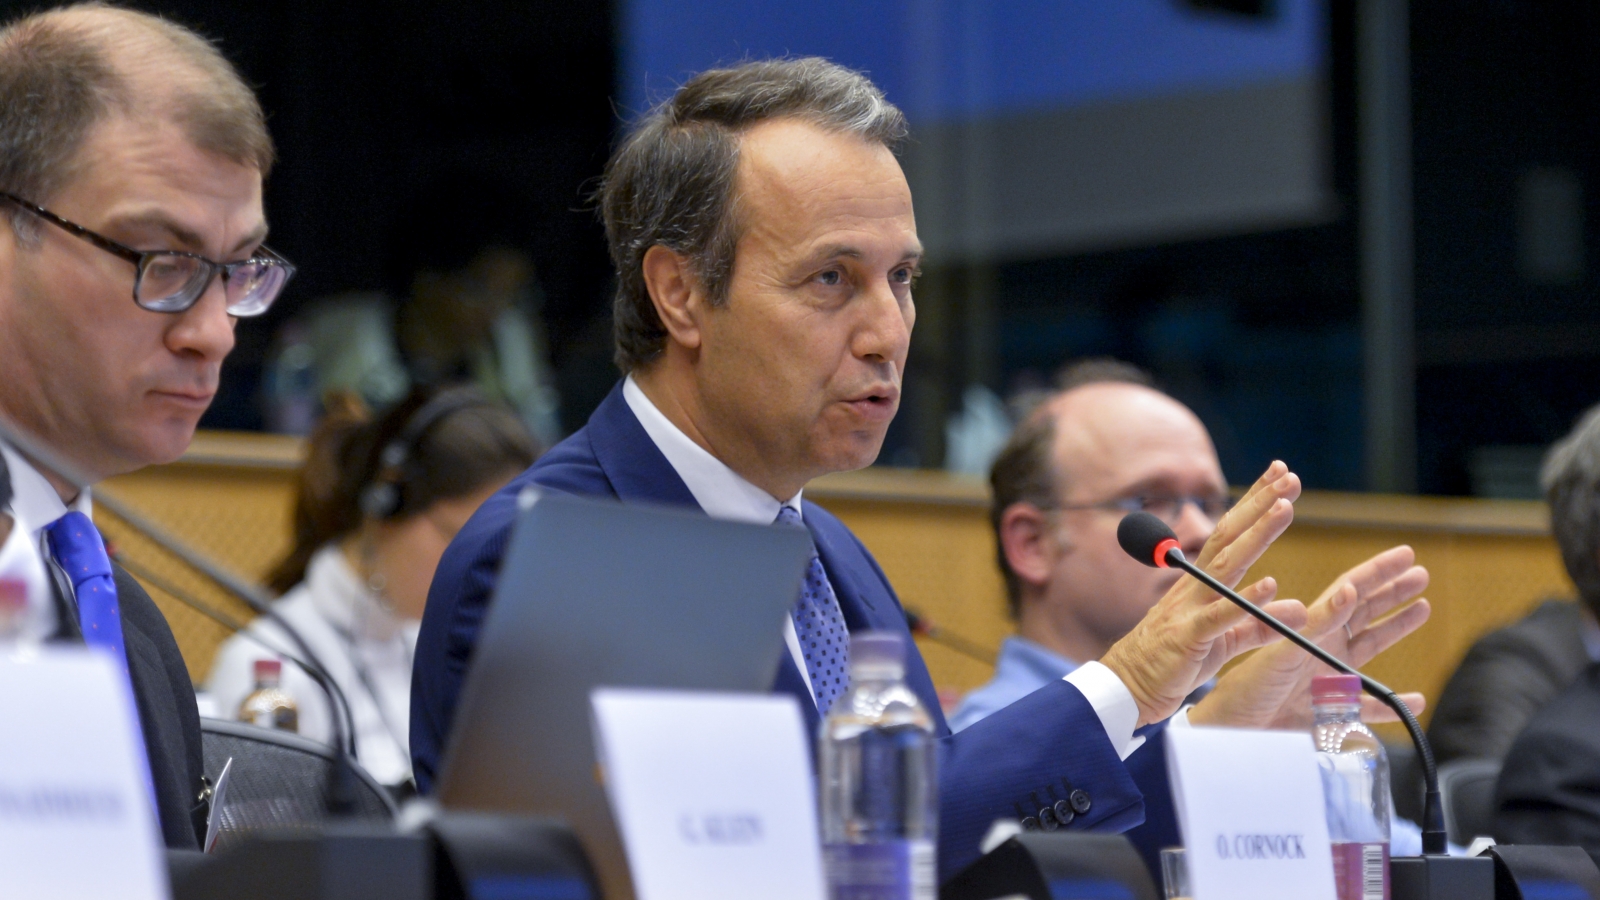 Eurochambres calls for greater efforts to improve business climate in Eastern Partnership region